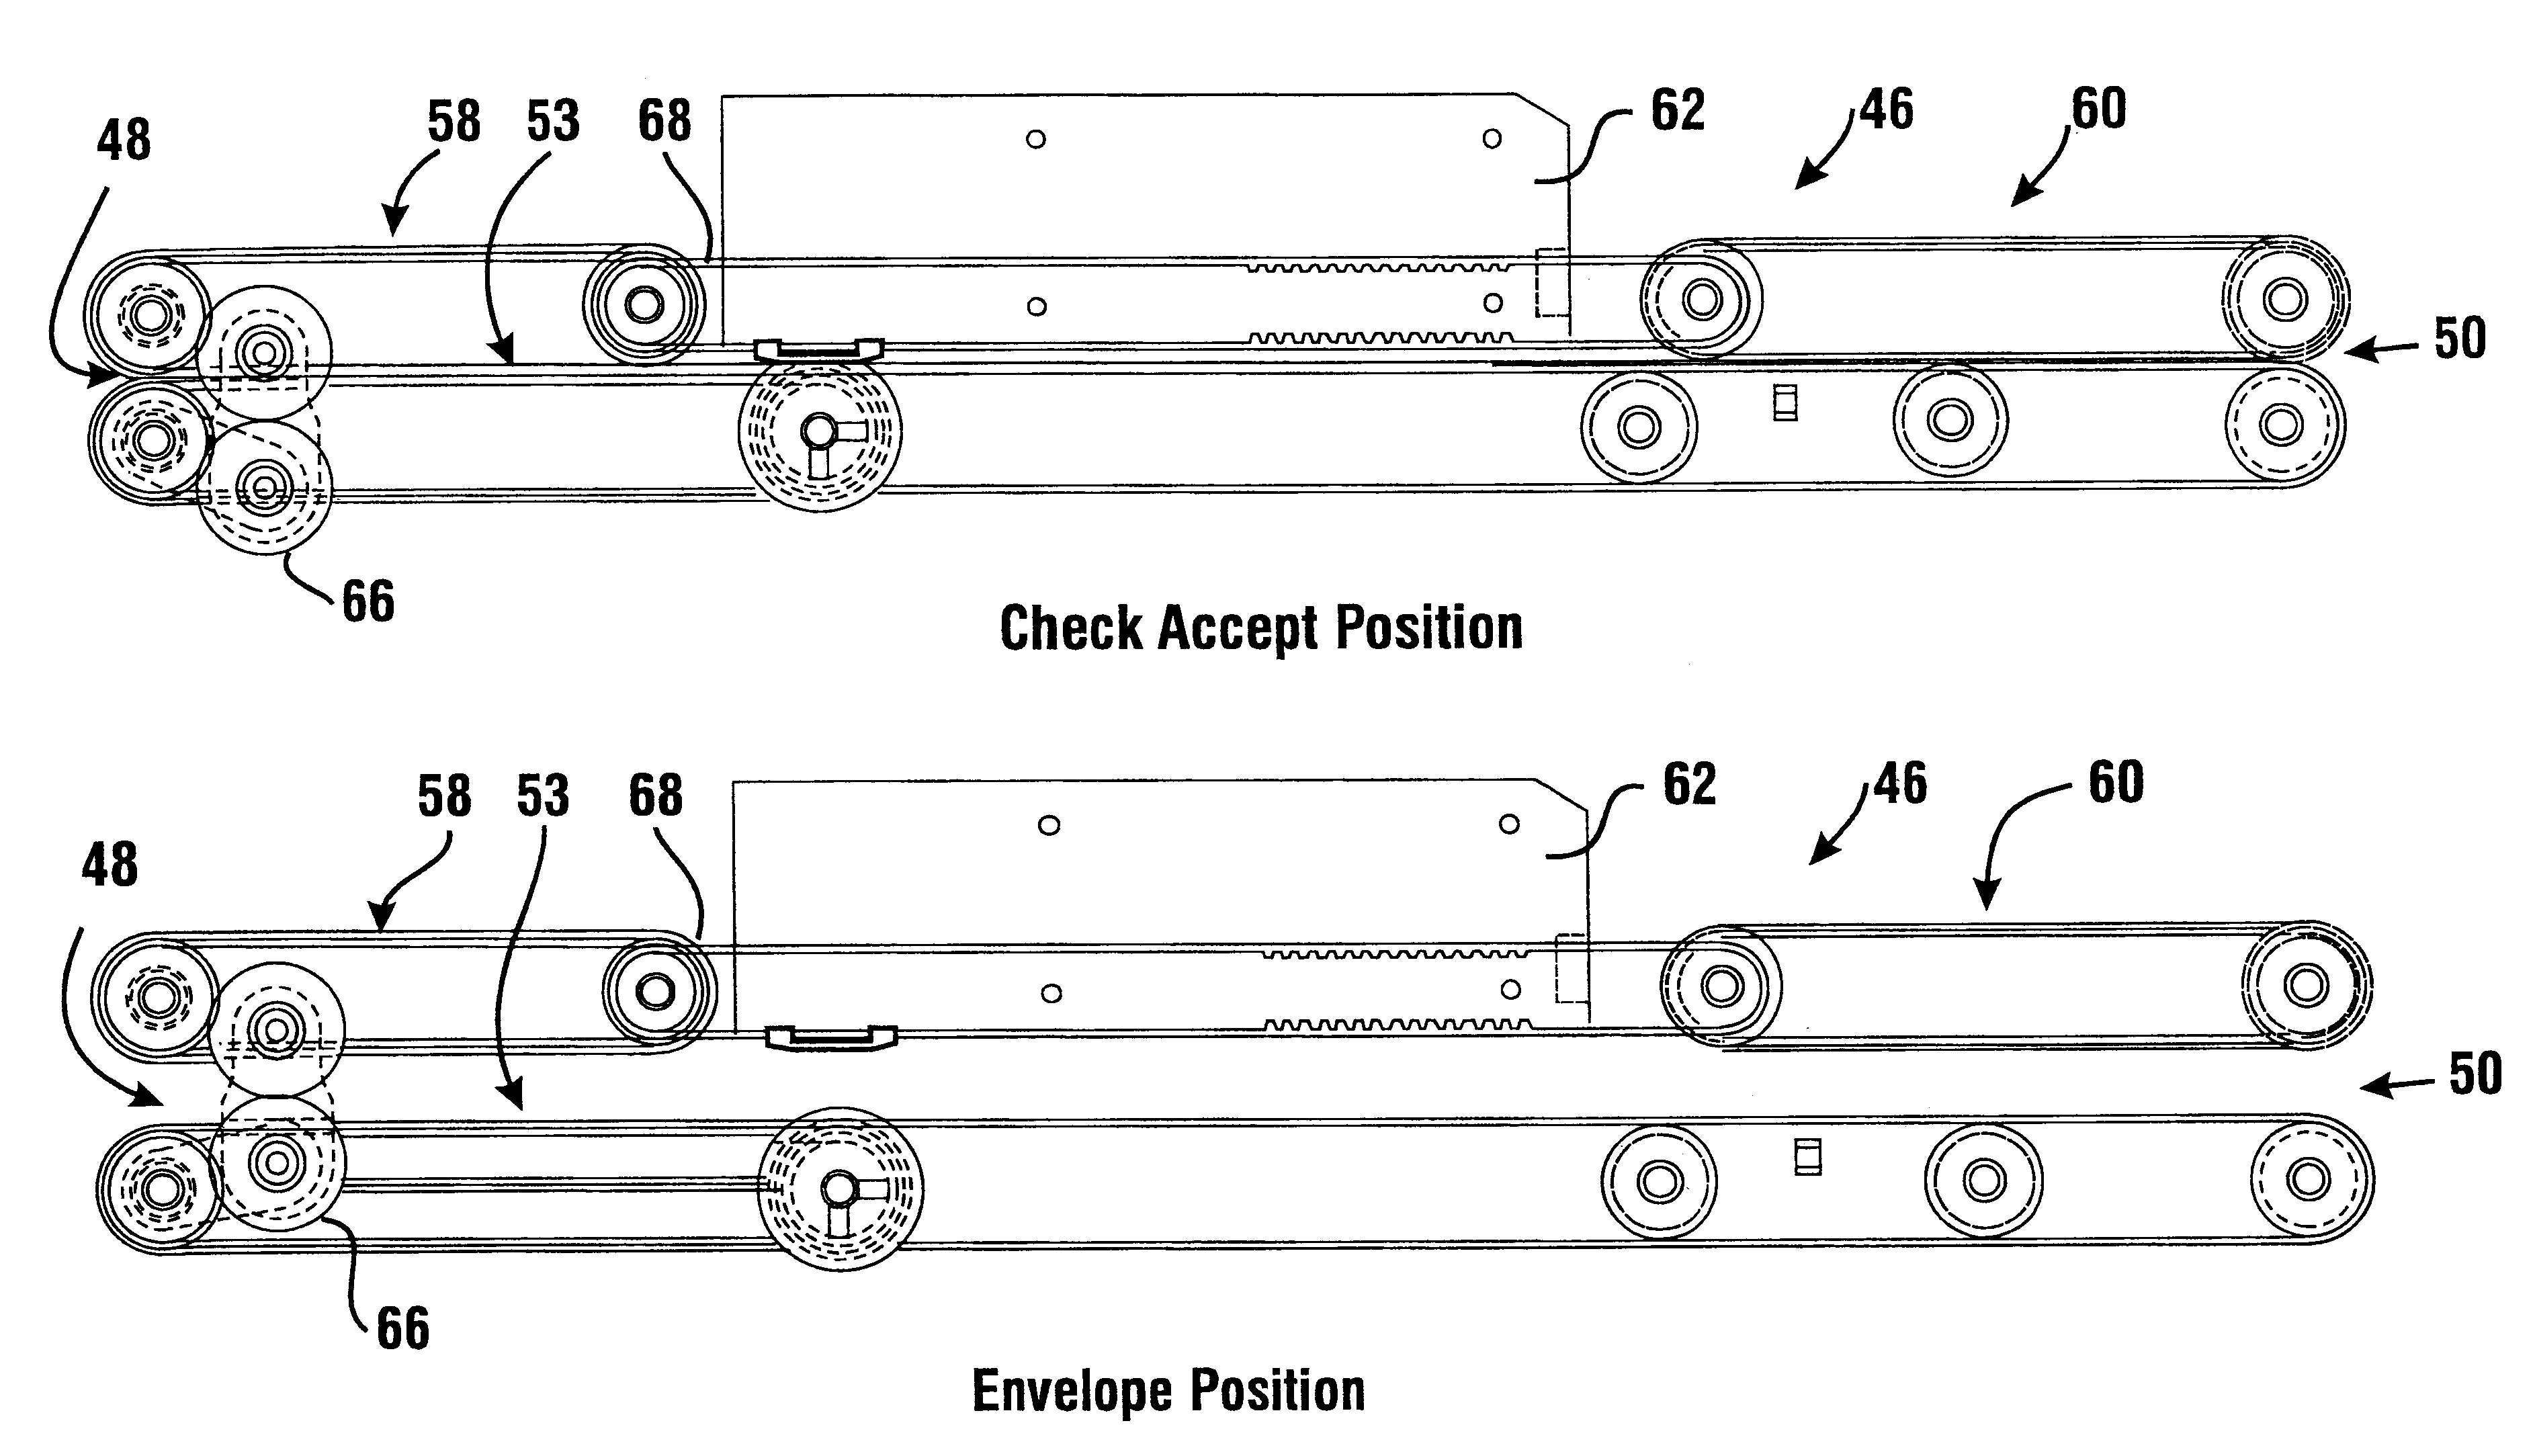 Deposit accepting apparatus and system for automated banking machine